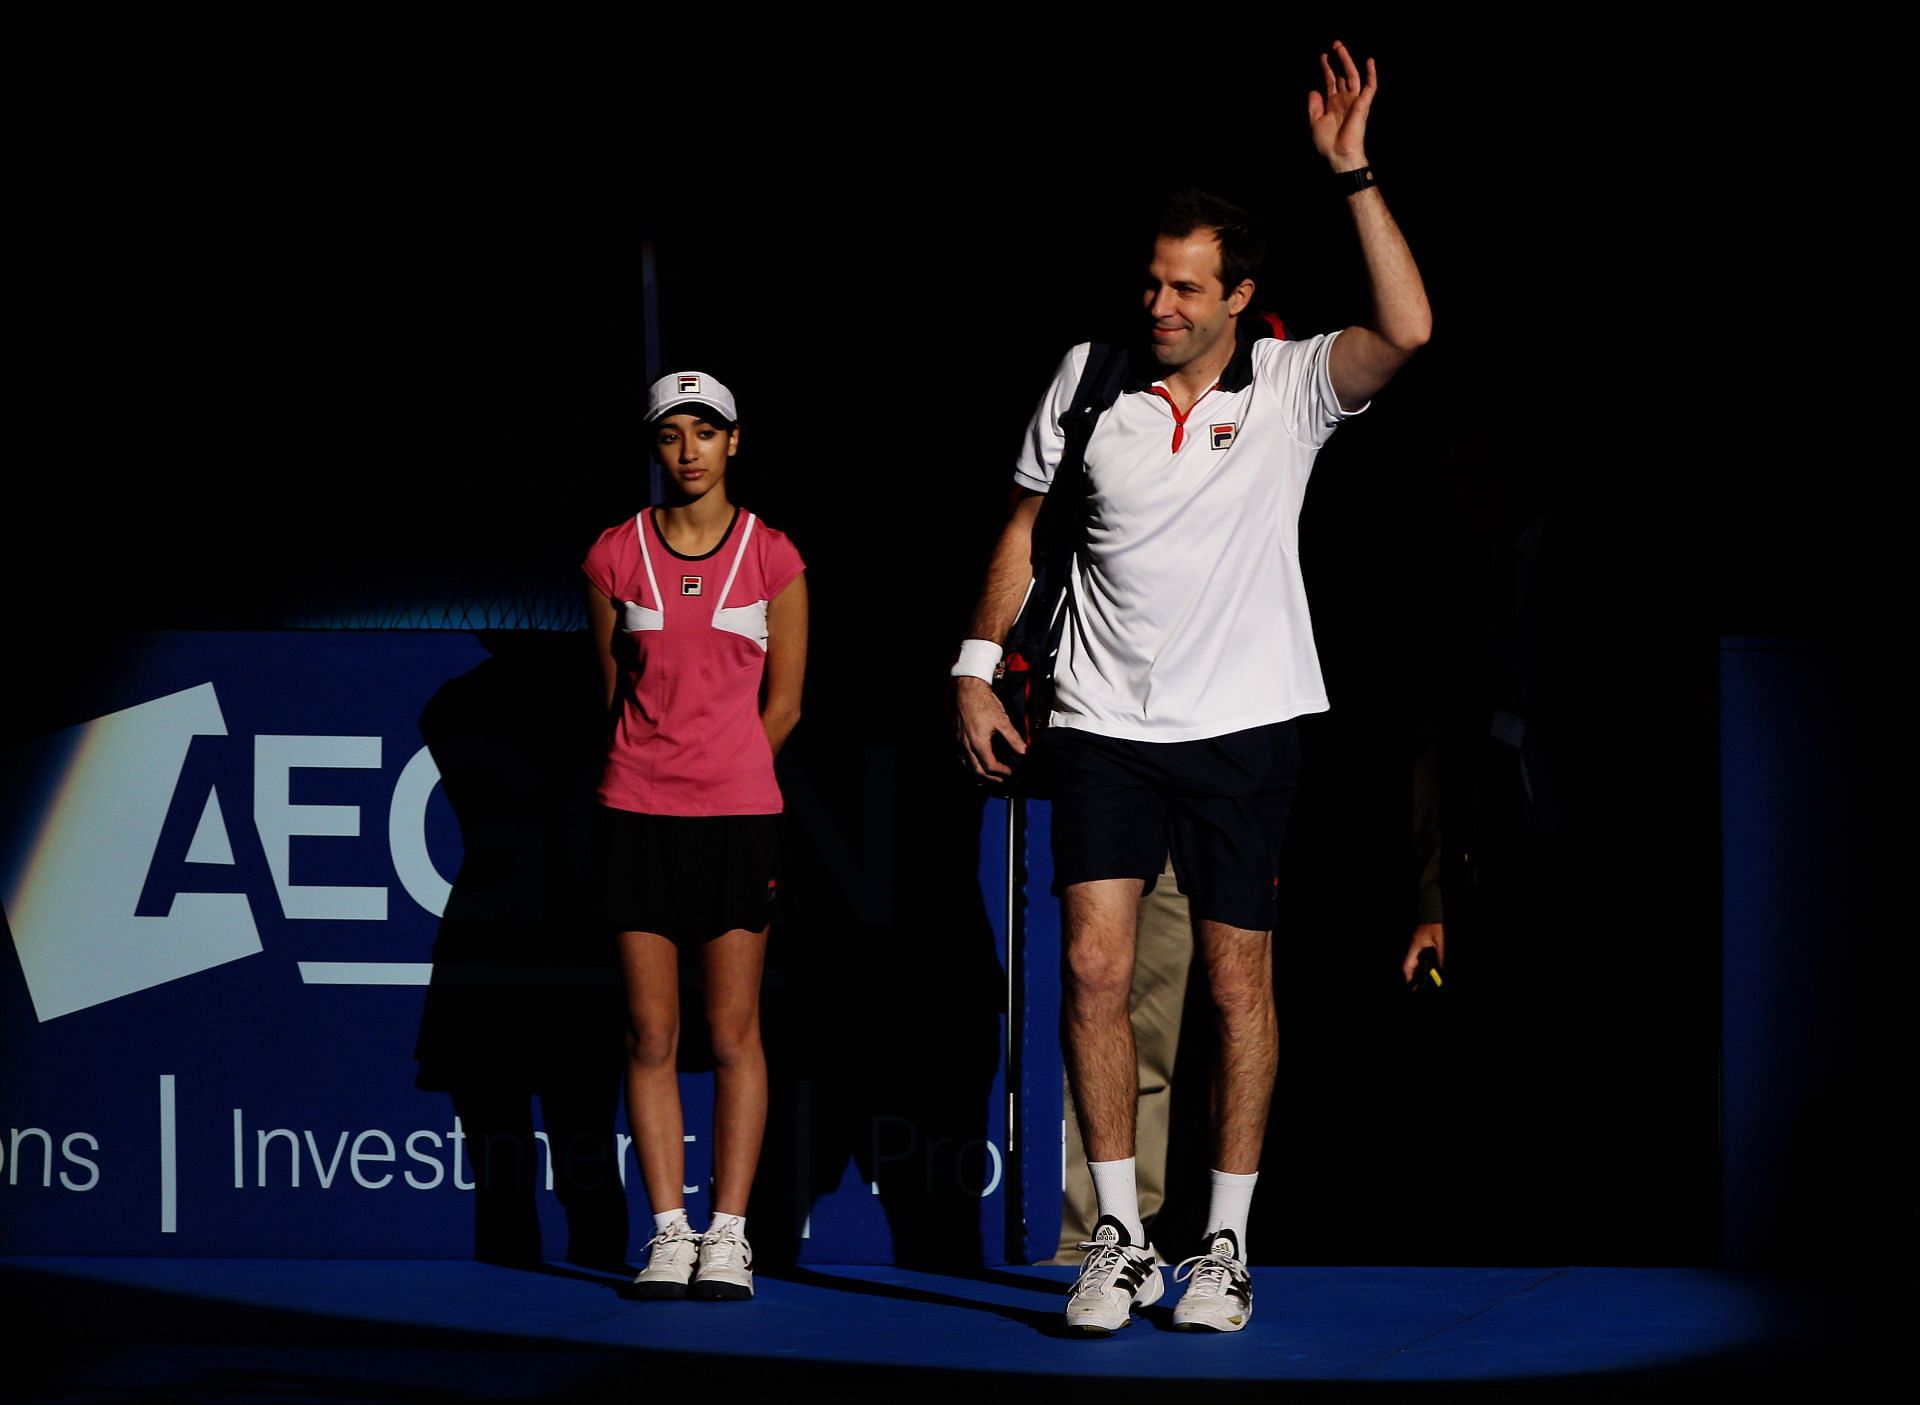 Rusedski became the first male tennis player to win the award